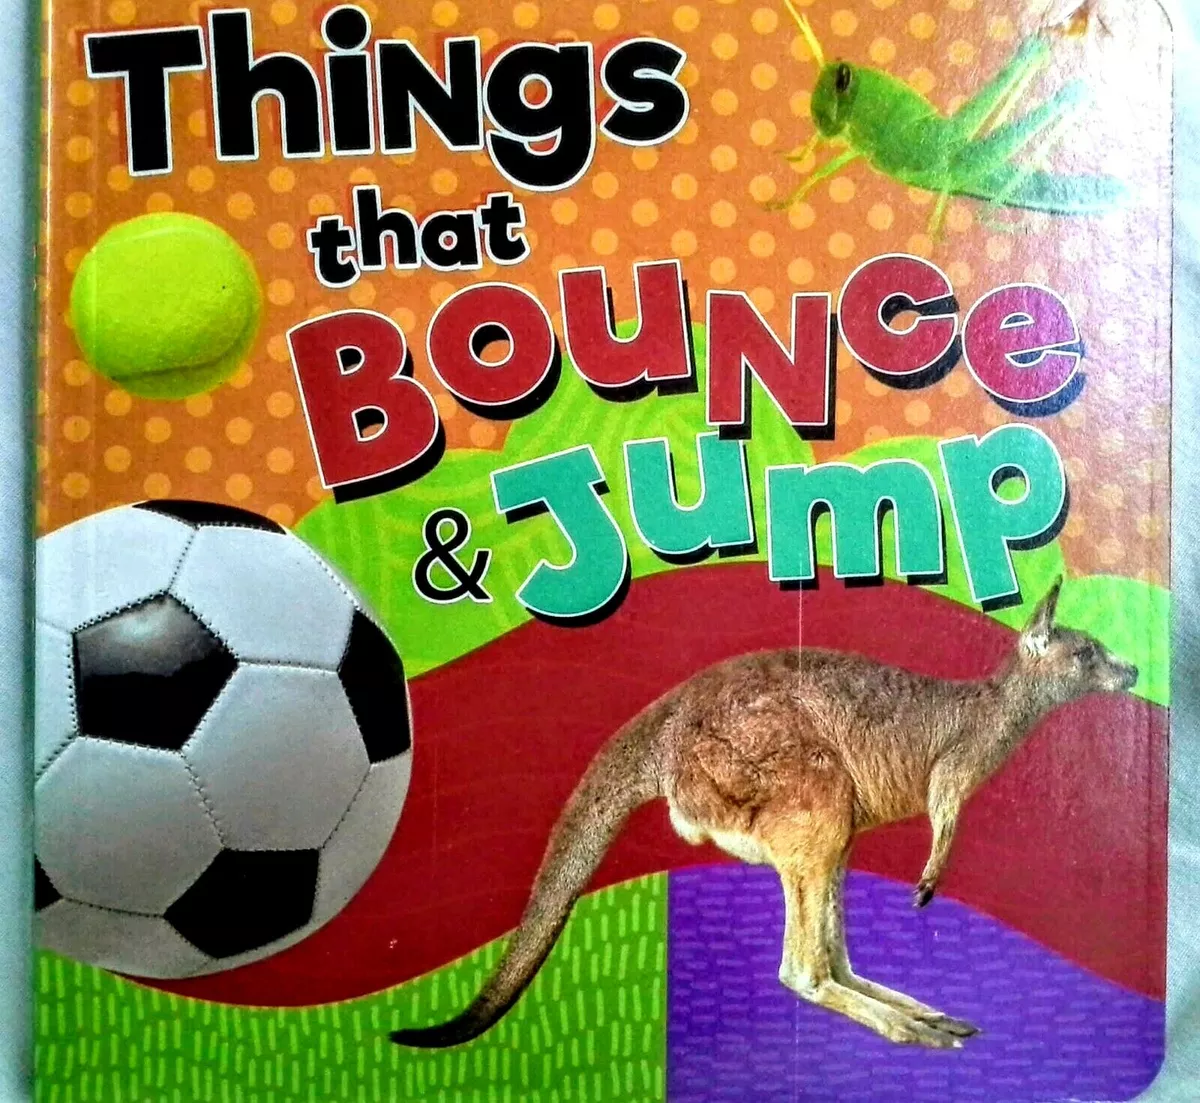 ariel biggs recommends Things That Bounce